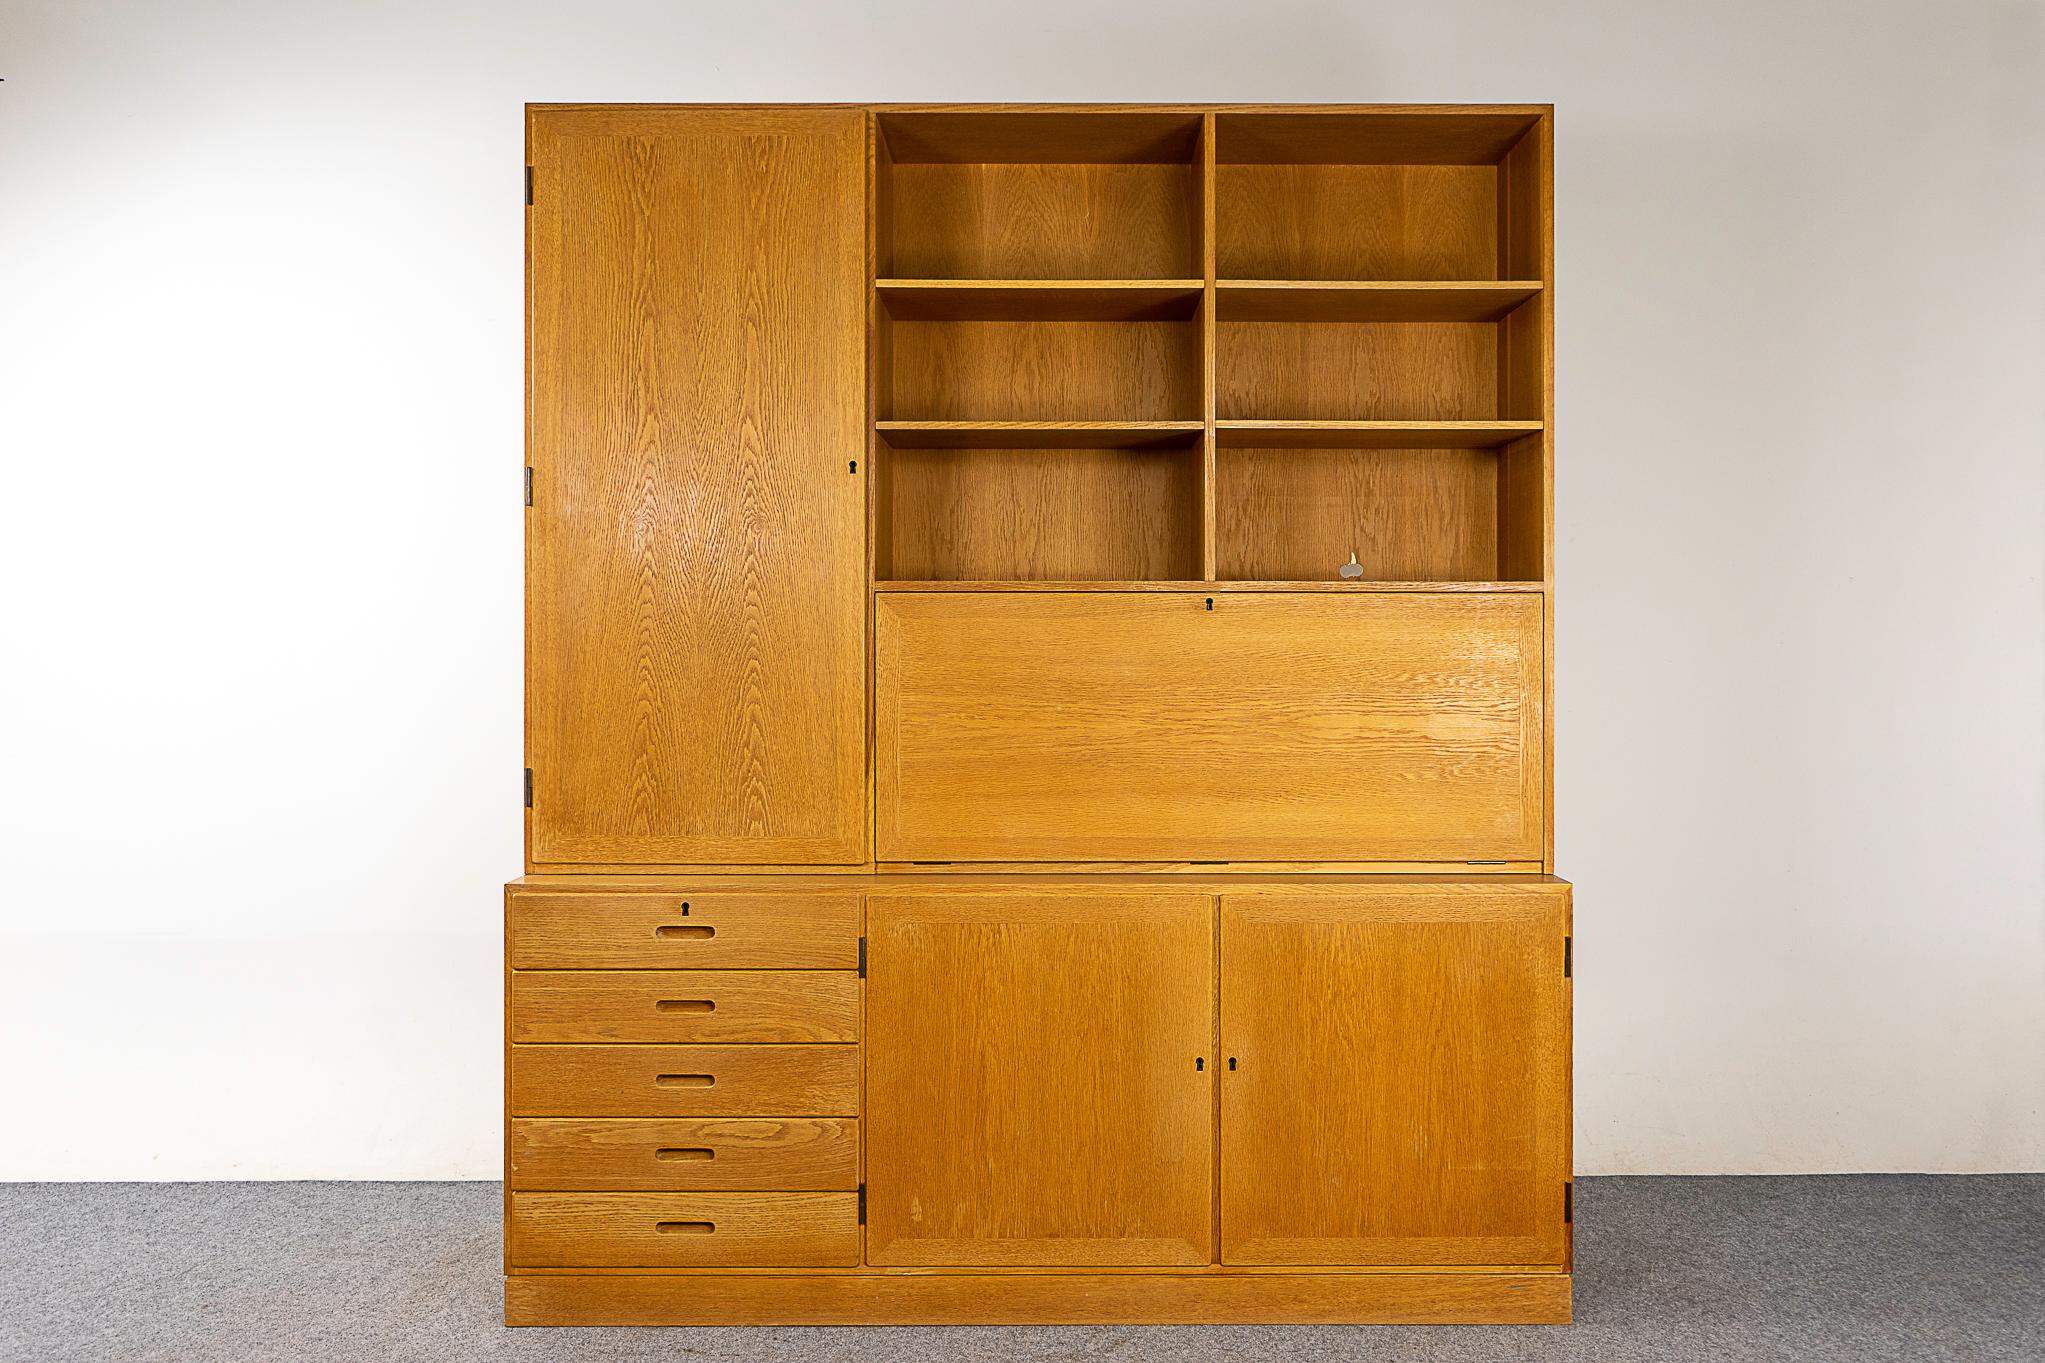 Oak Danish bookcase cabinet by Kai Winding, circa 1960's. Impressive, highly functional bookcase combines open shelving, exterior drawers, cabinetry and a drop down desk with a fitted interior! Anything and everything all in one place. Danish